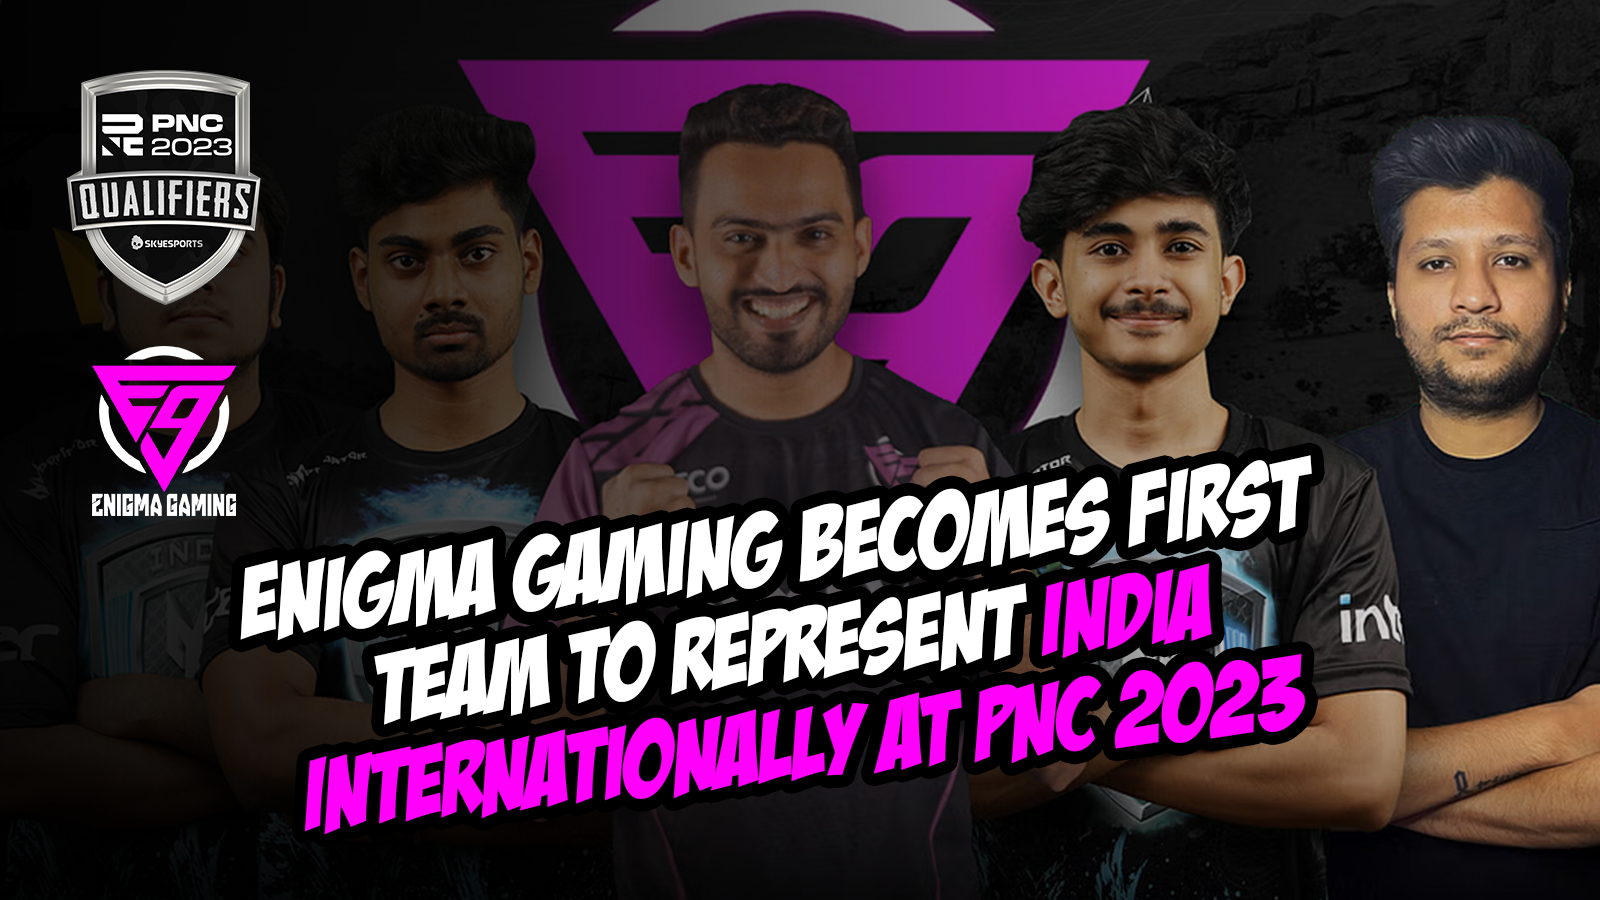 Enigma Gaming Becomes First Team to Represent India Internationally at PNC 2023